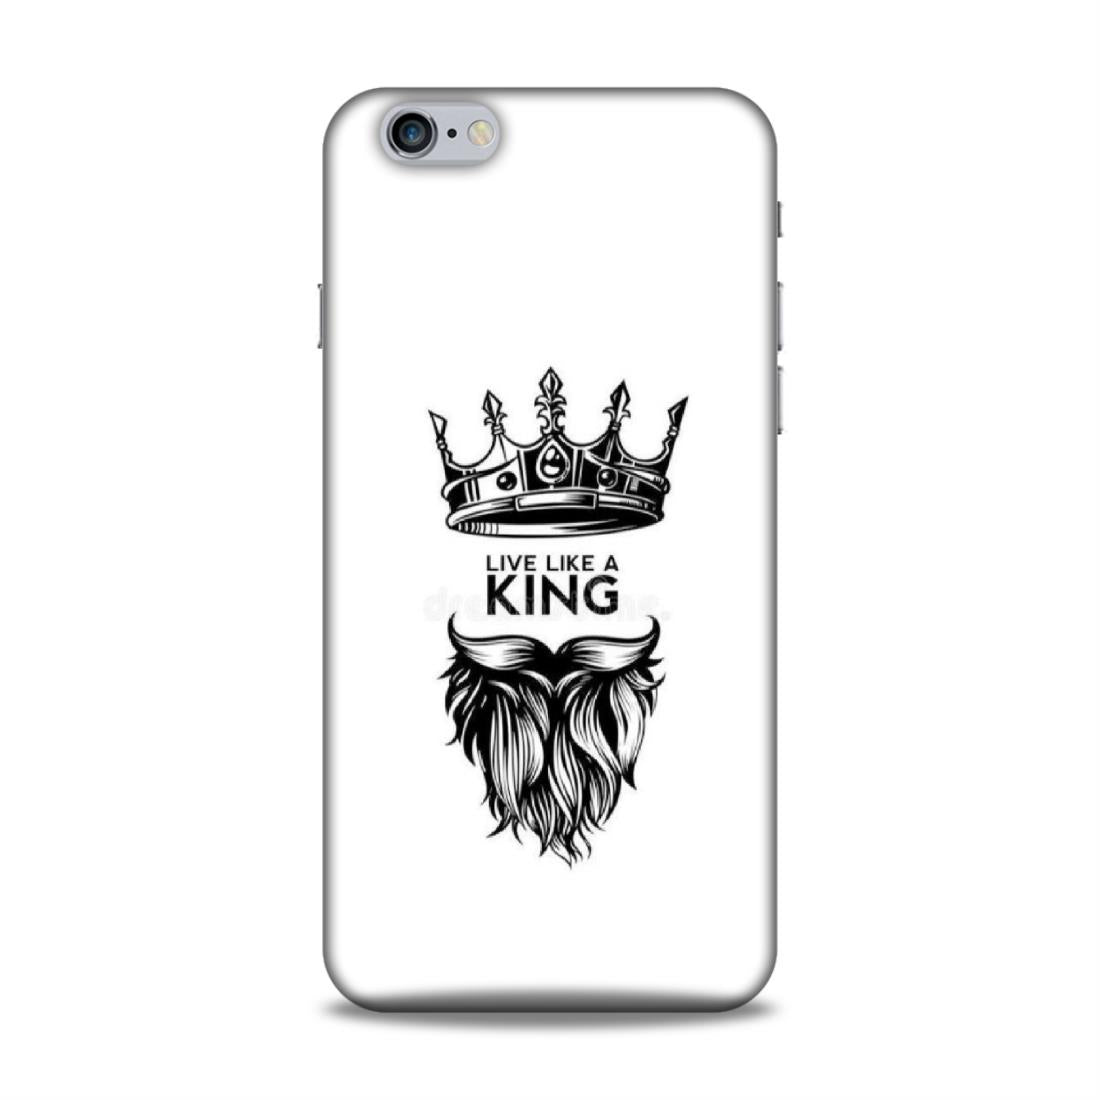 Live Like A King Hard Back Case For Apple iPhone 6 Plus / 6s Plus